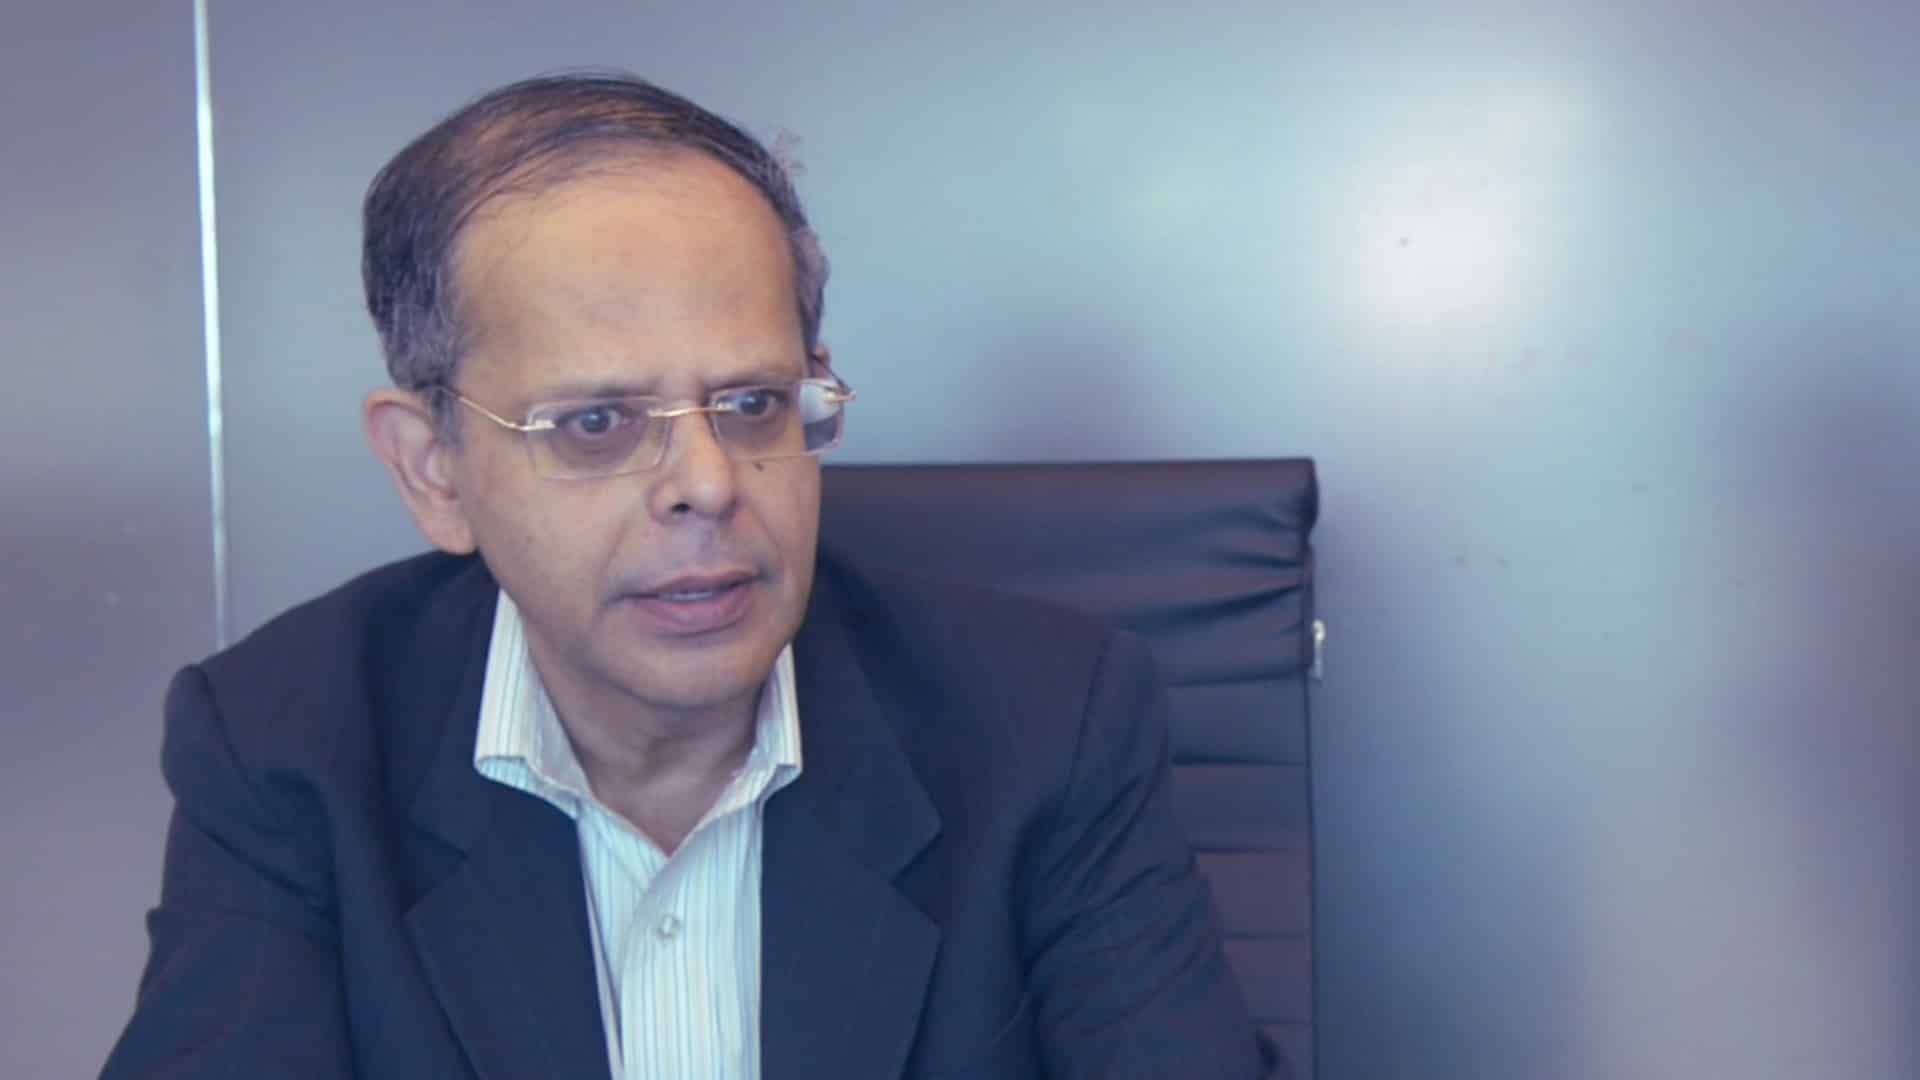 RBI to hike rates by 0.35-0.50 pc at Aug 5 review: Axis Bank chief economist